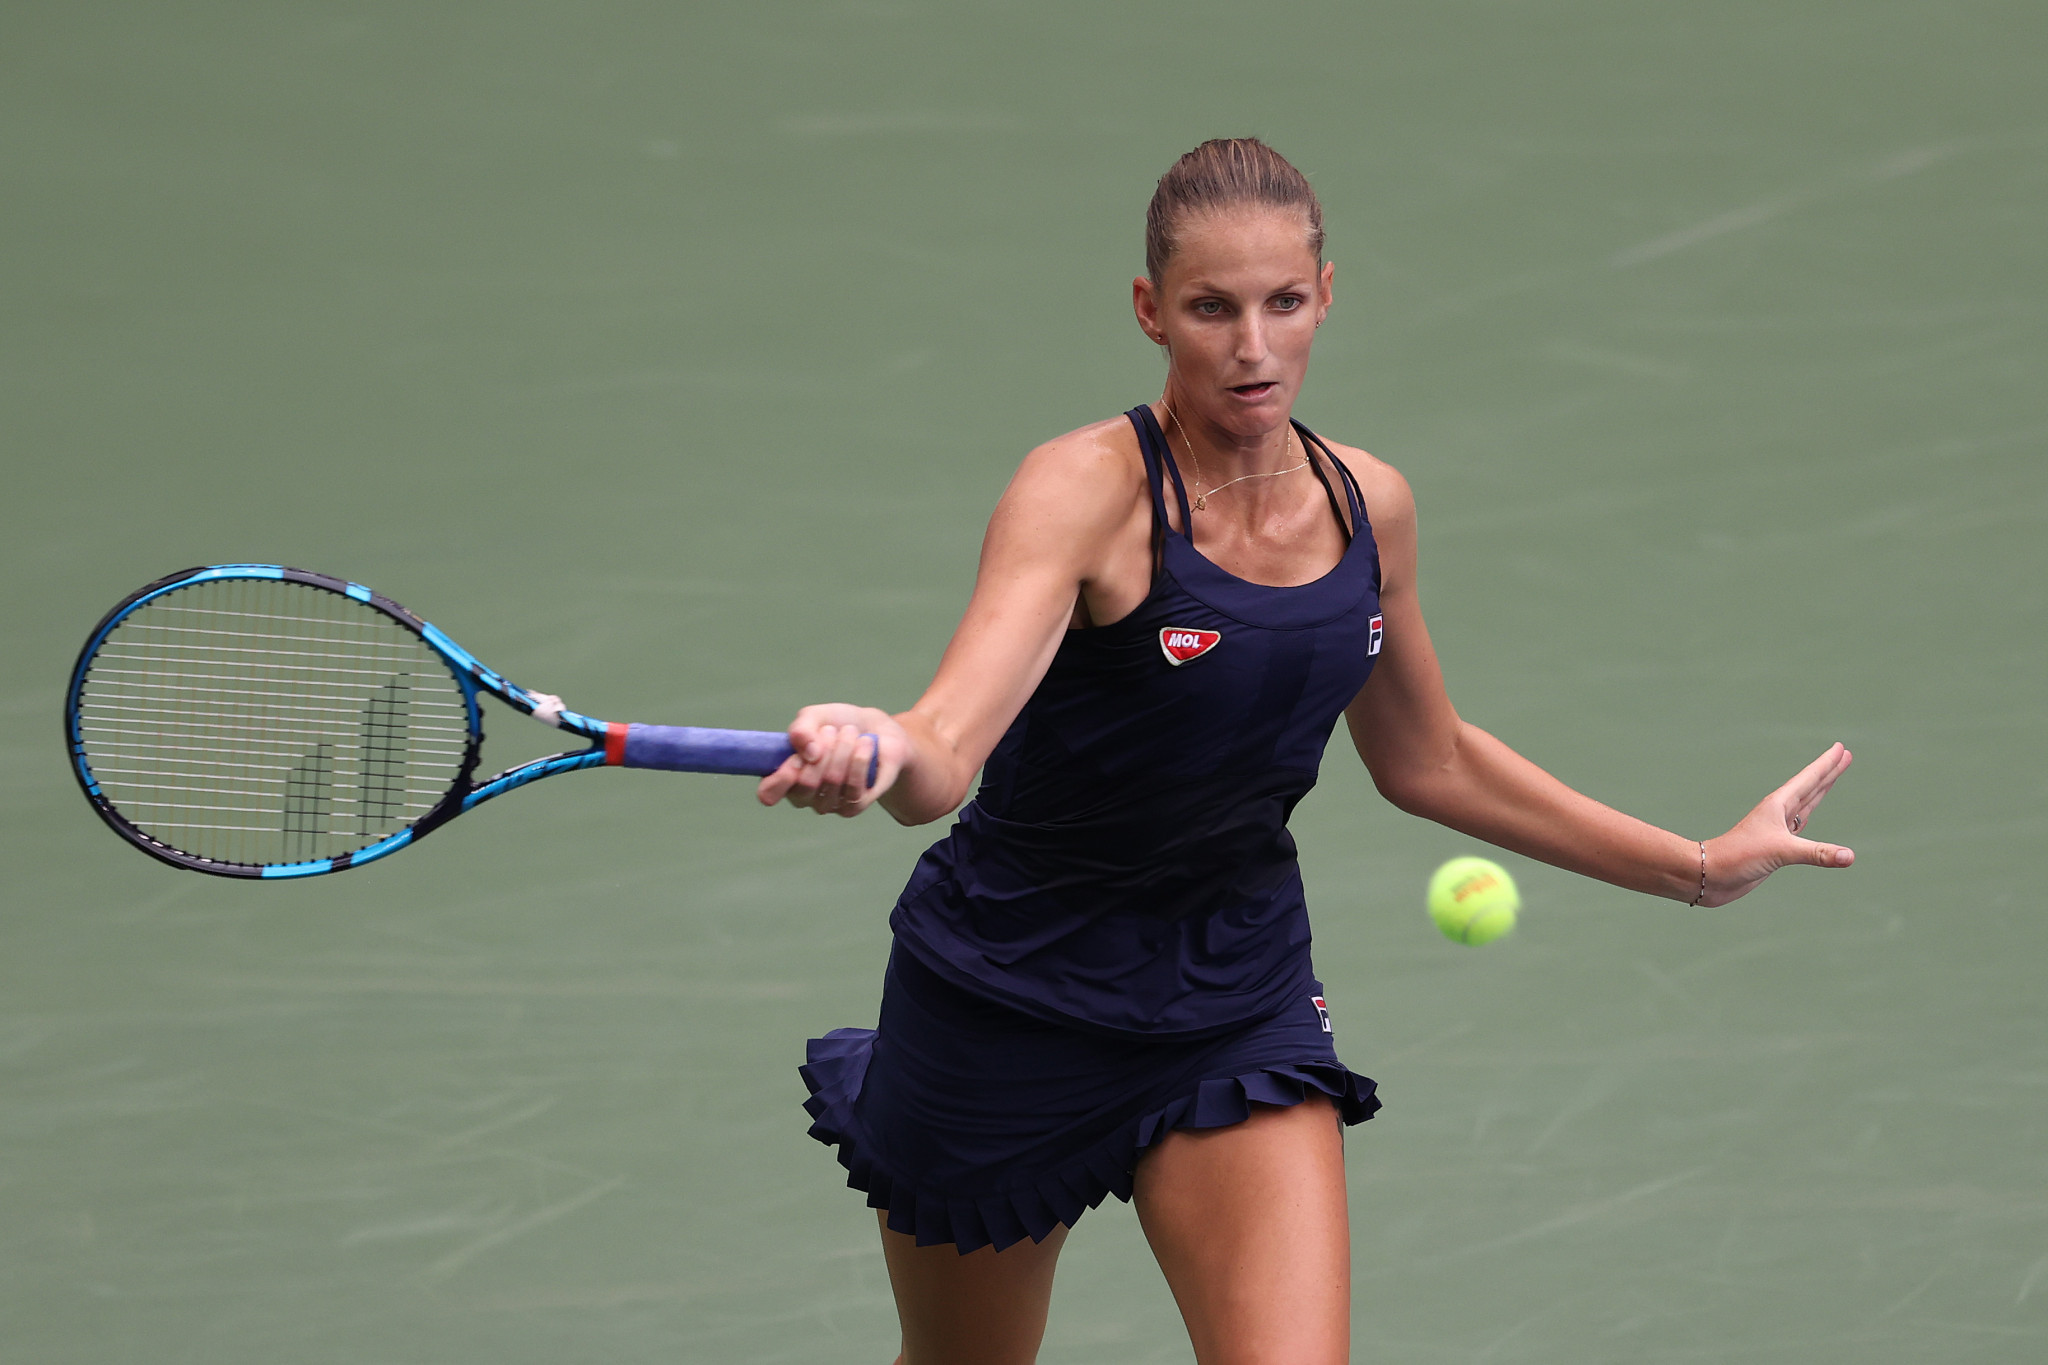 Women's top seed Karolina Pliskova became the highest profile casualty of the US Open so far, as she crashed out on day three ©Getty Images